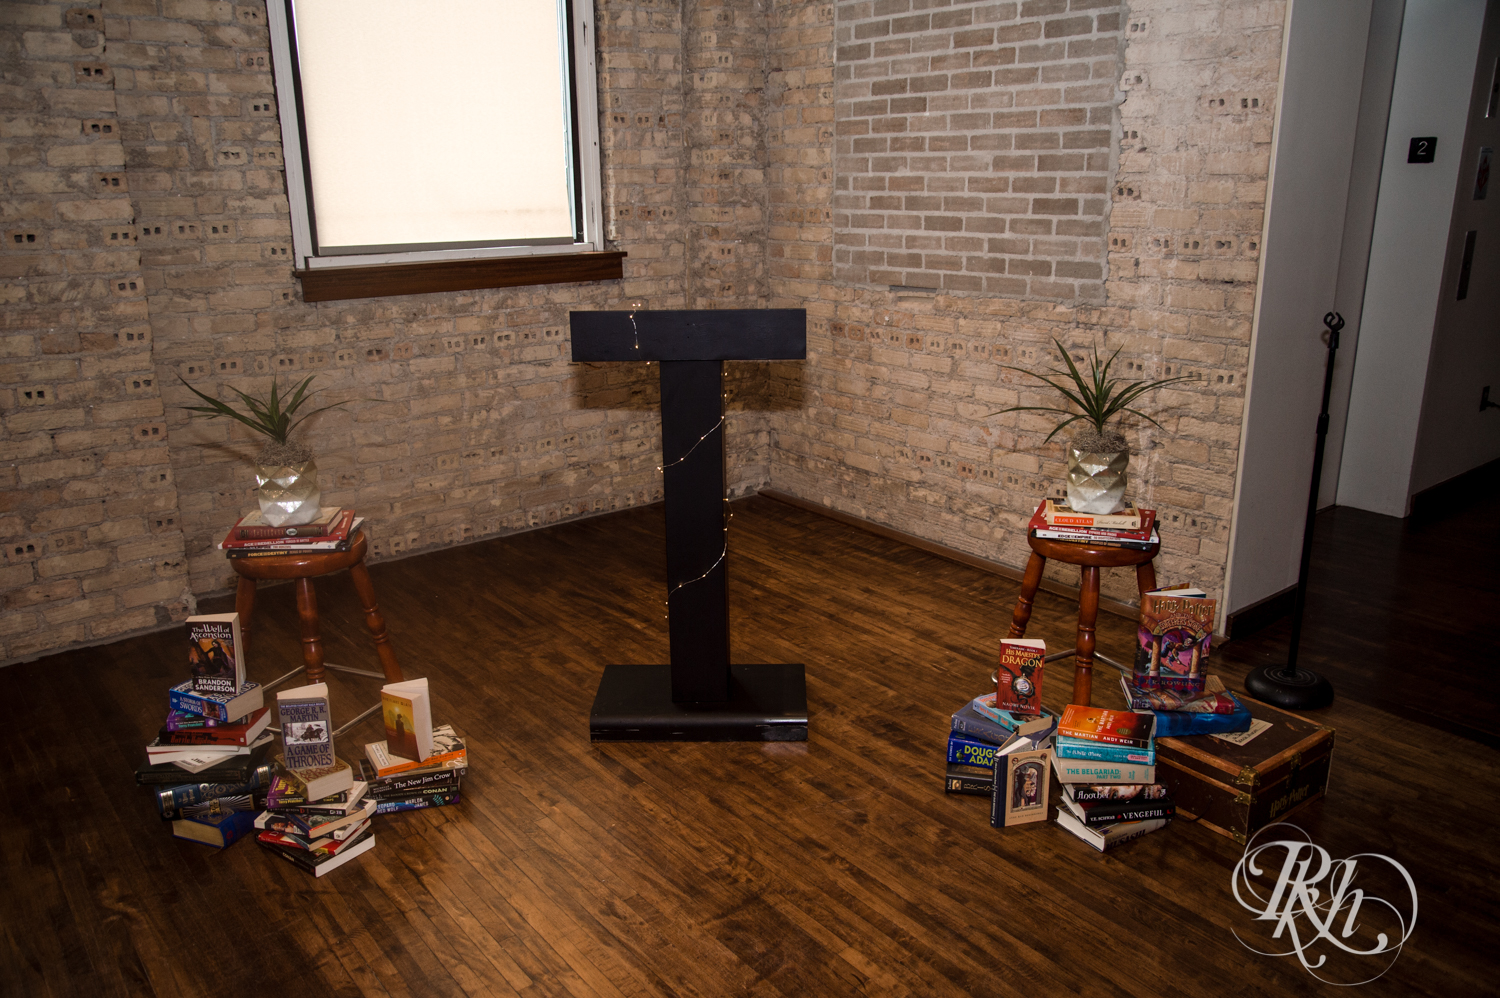 Indoor wedding alter made with books at Five Event Center in Minneapolis, Minnesota.